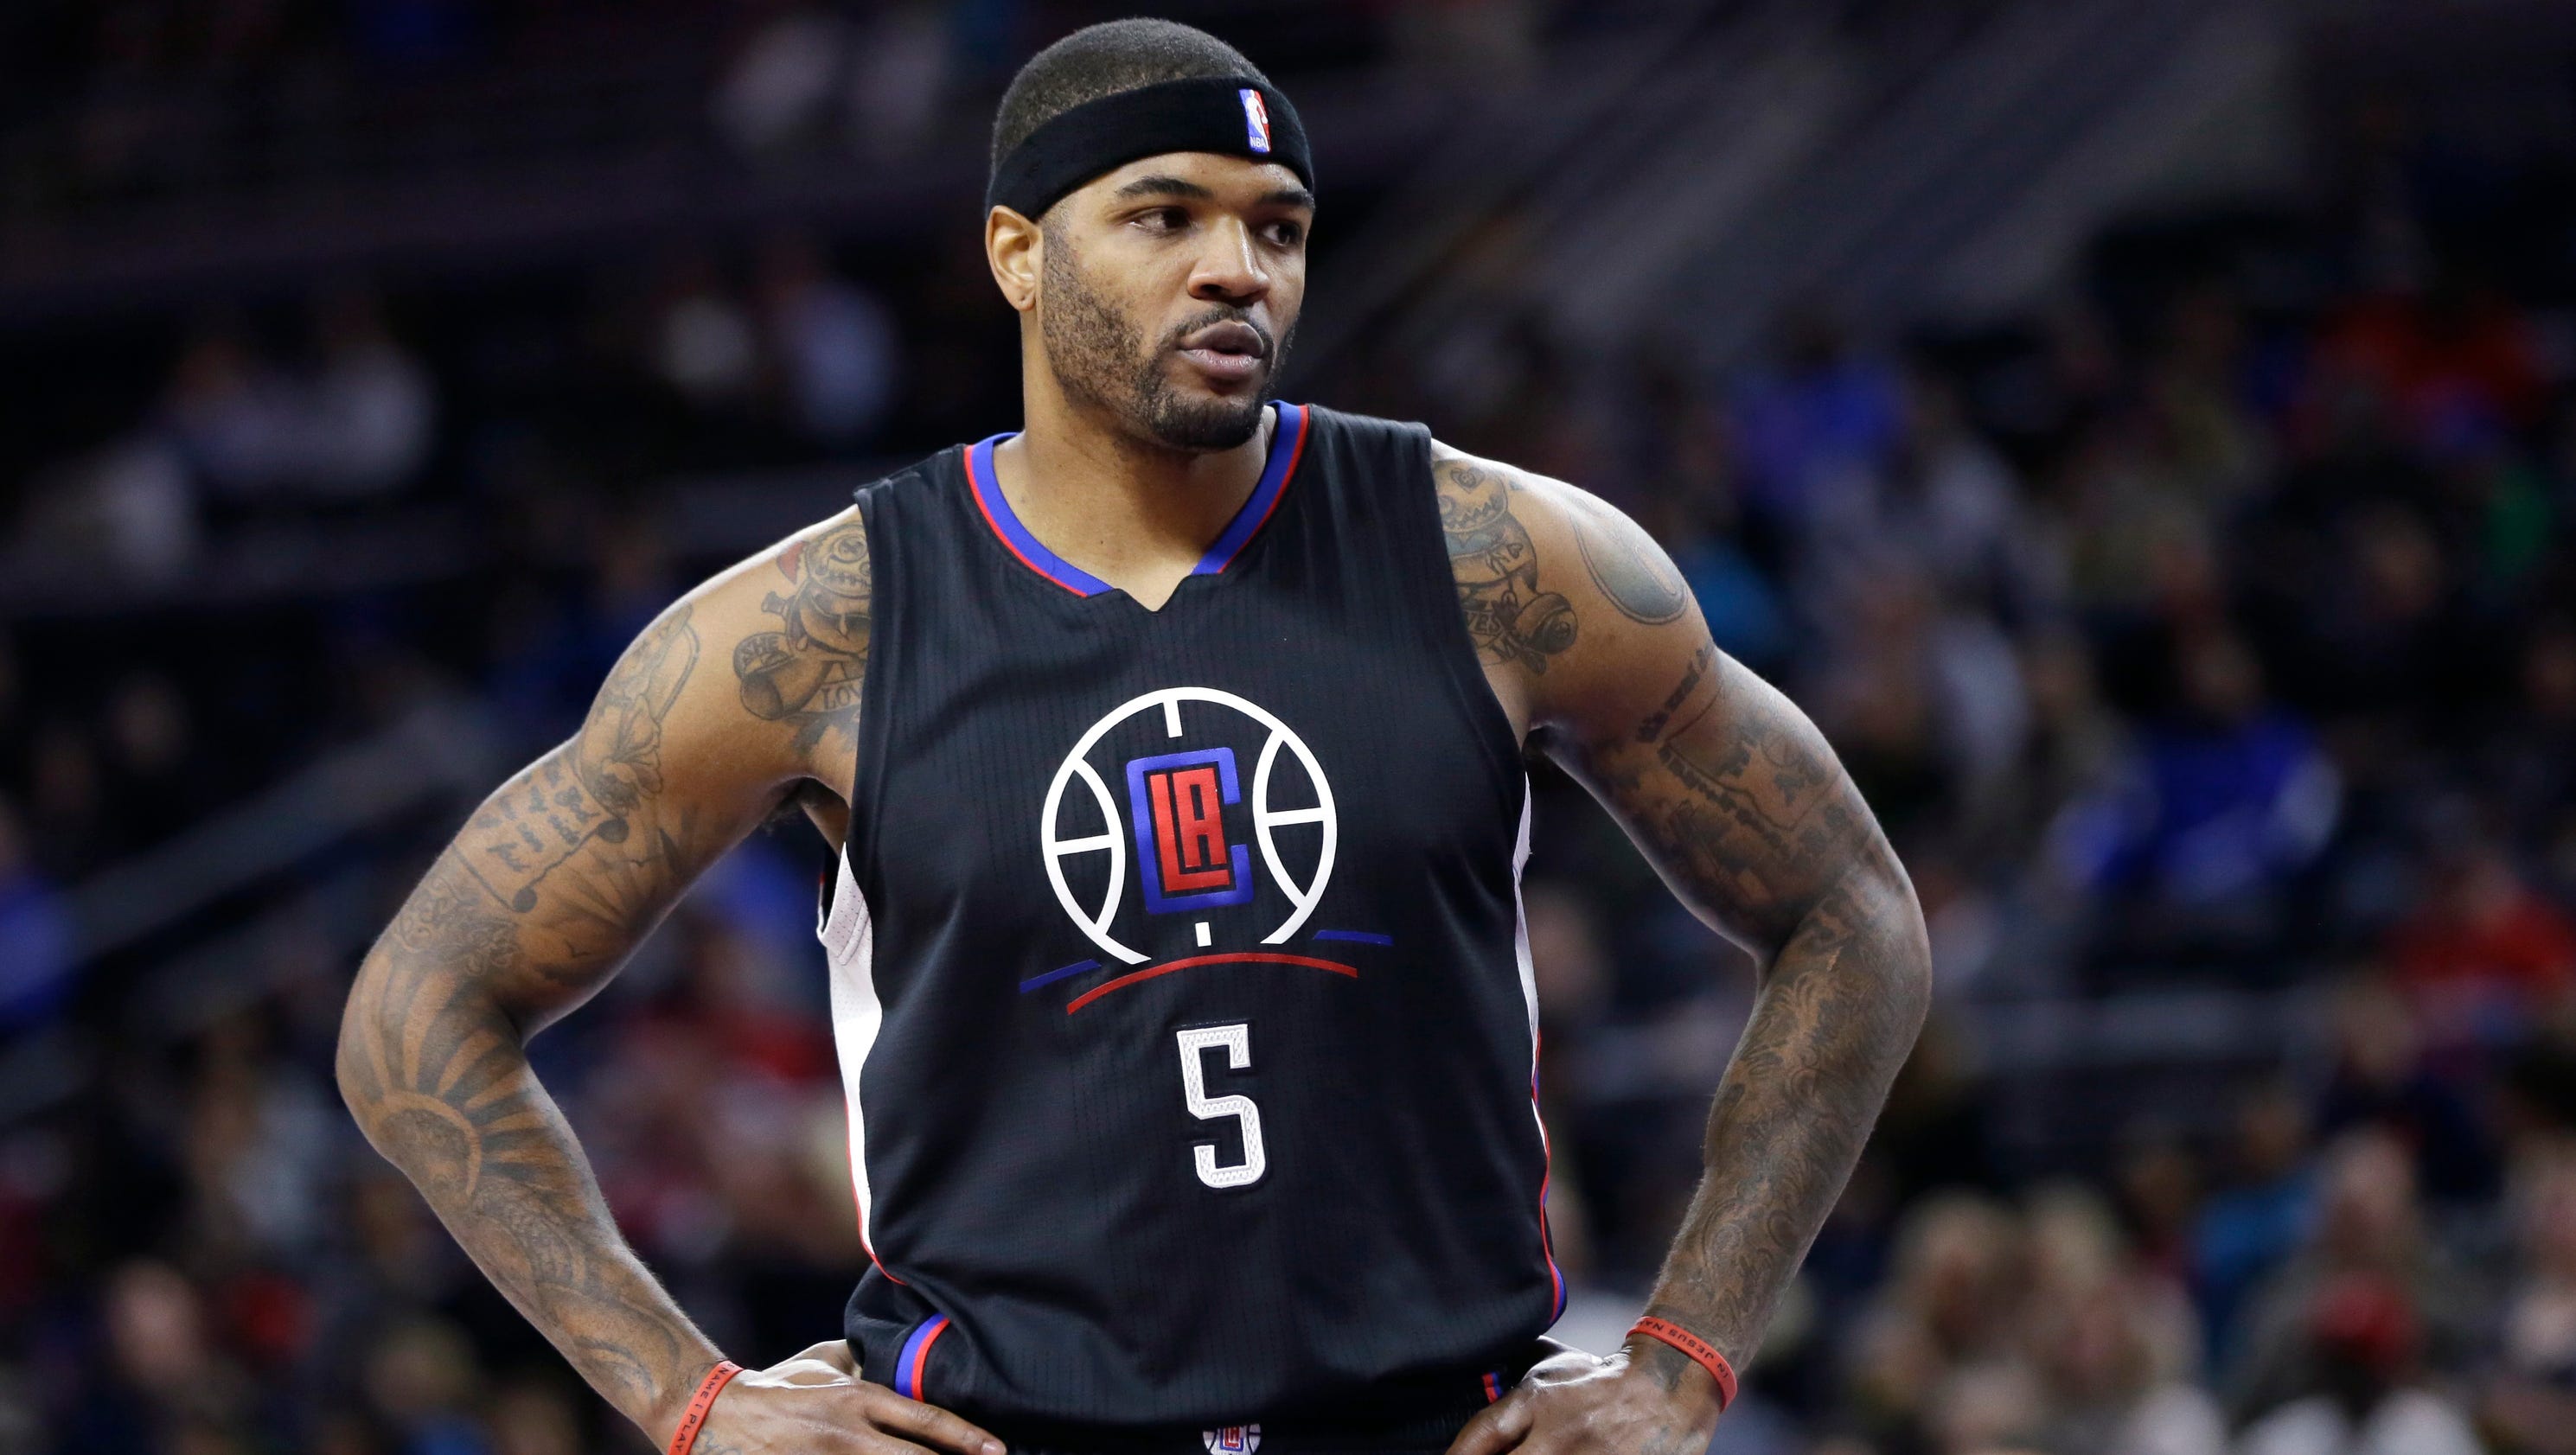 Josh Smith traded to Rockets from Clippers